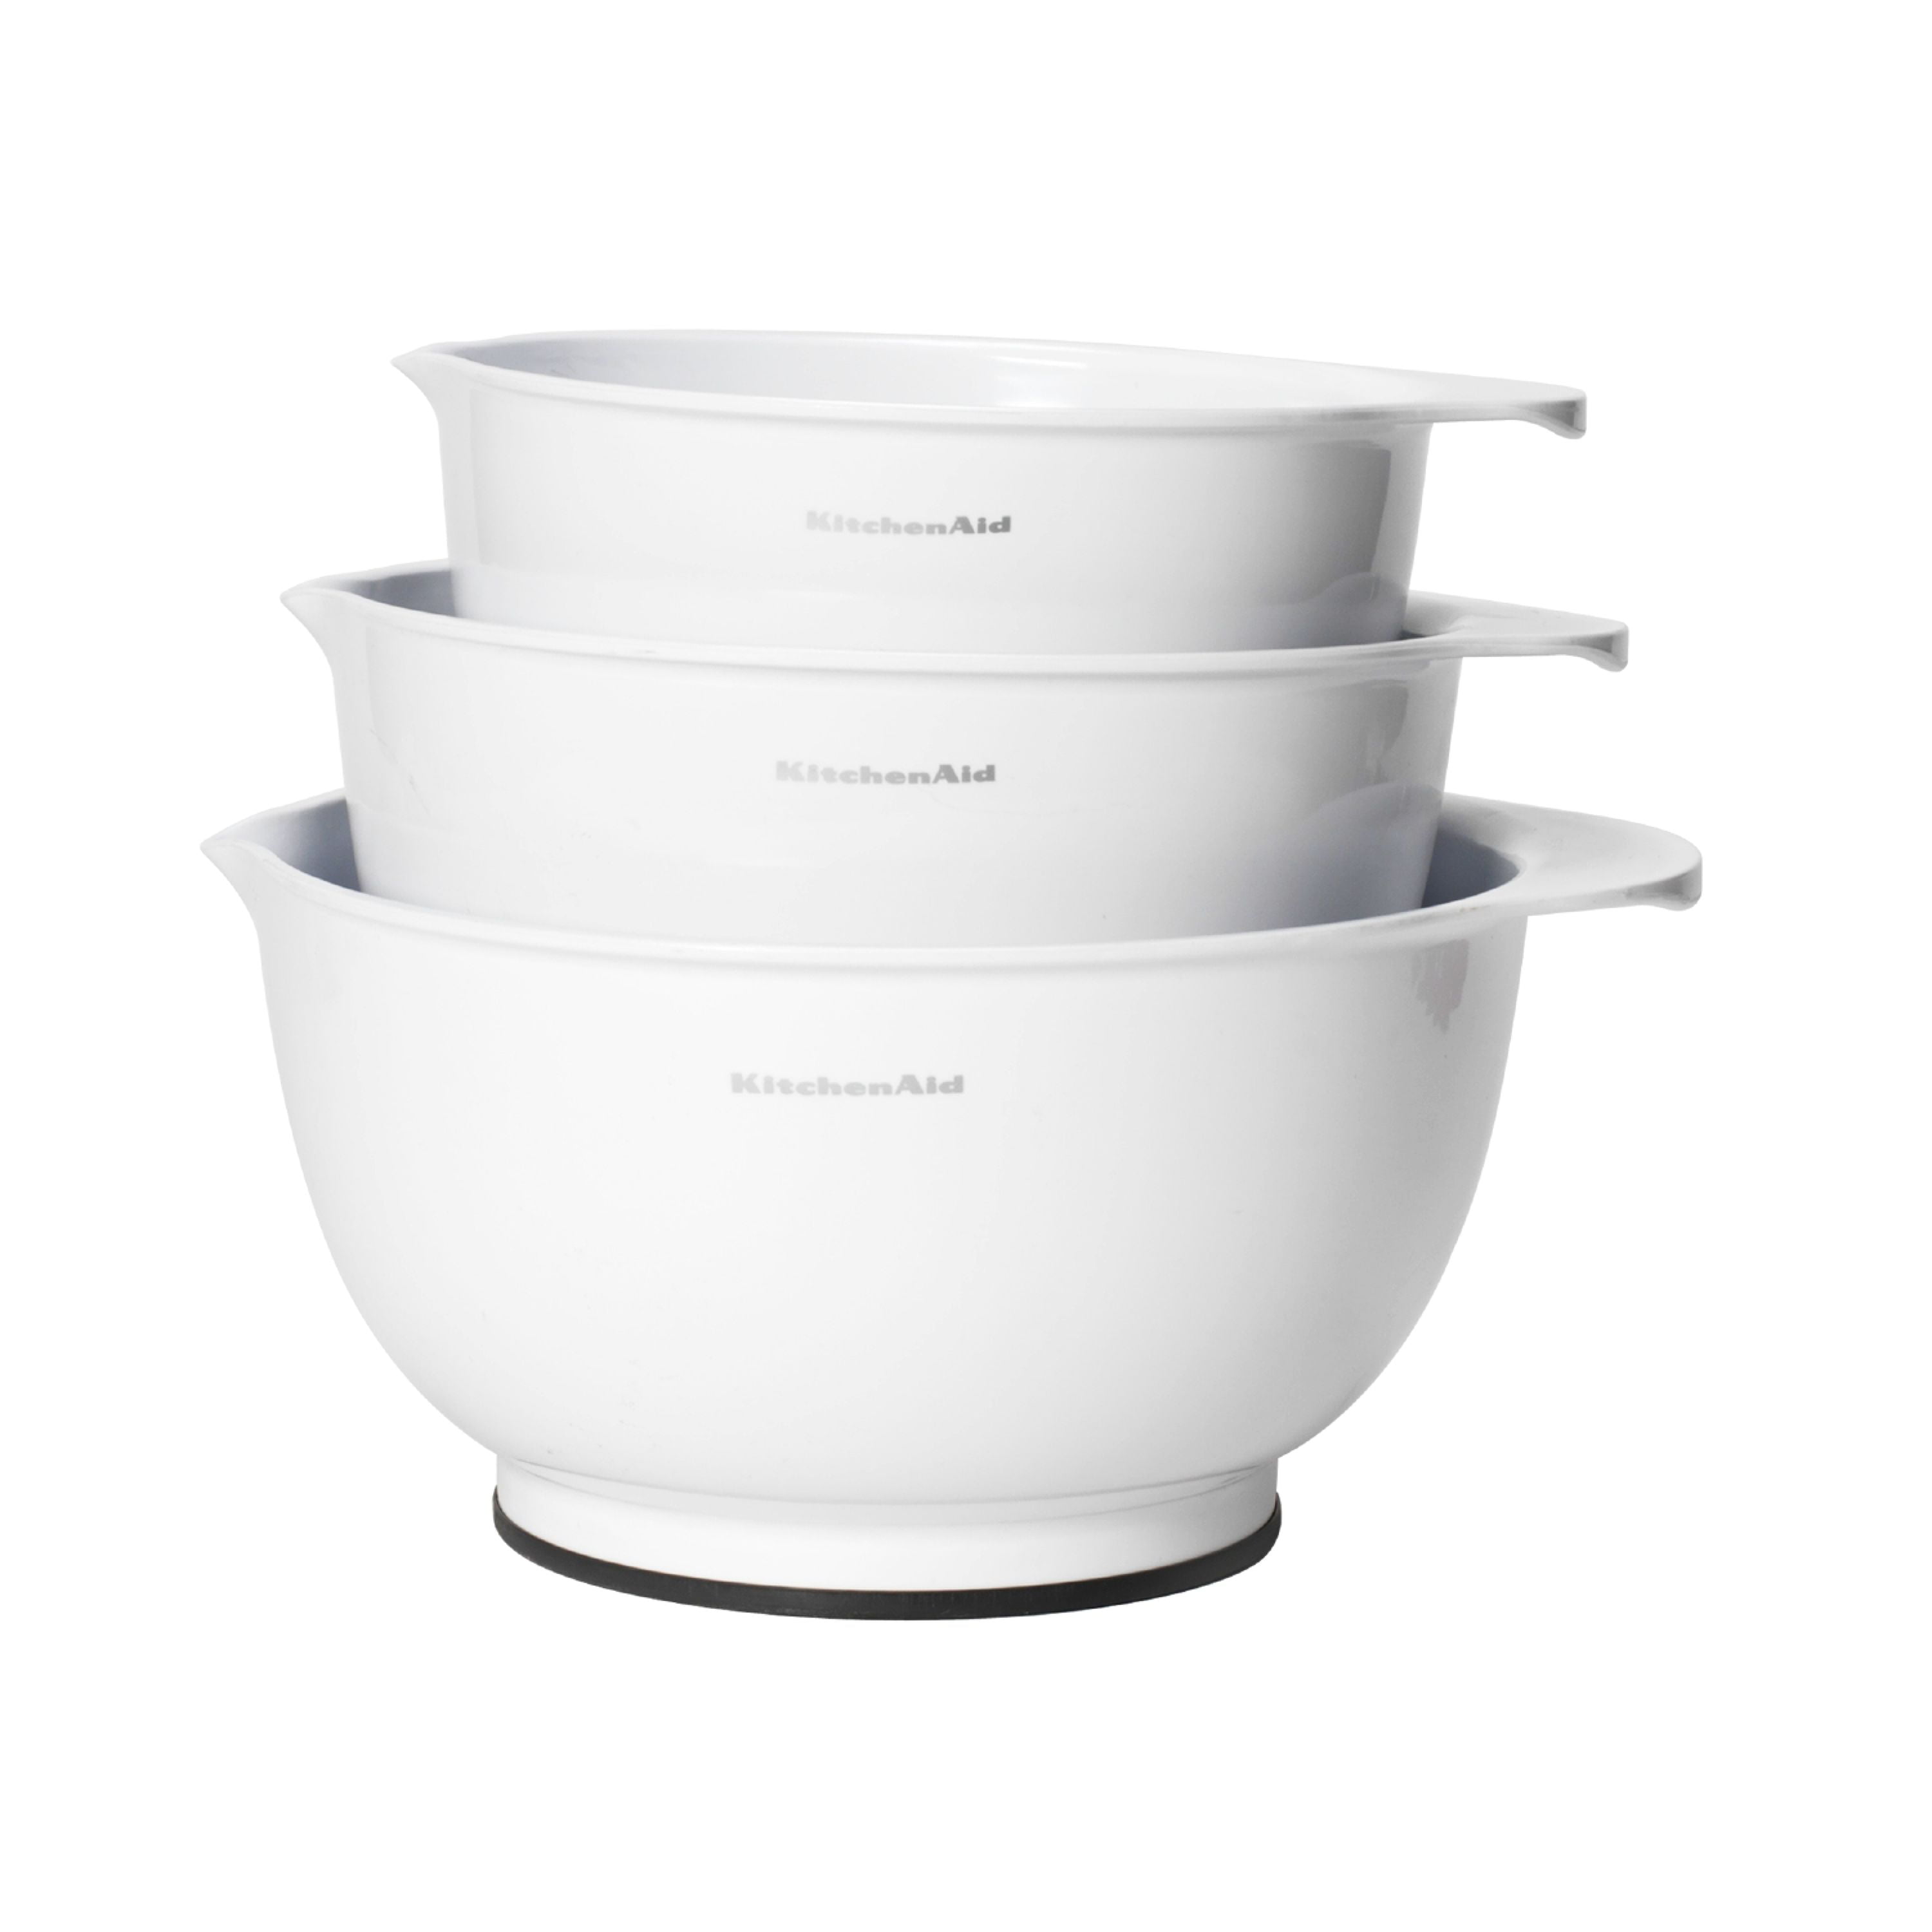 KitchenAid Plastic Set of 3 Mixing Bowls with Soft Foot in White ...